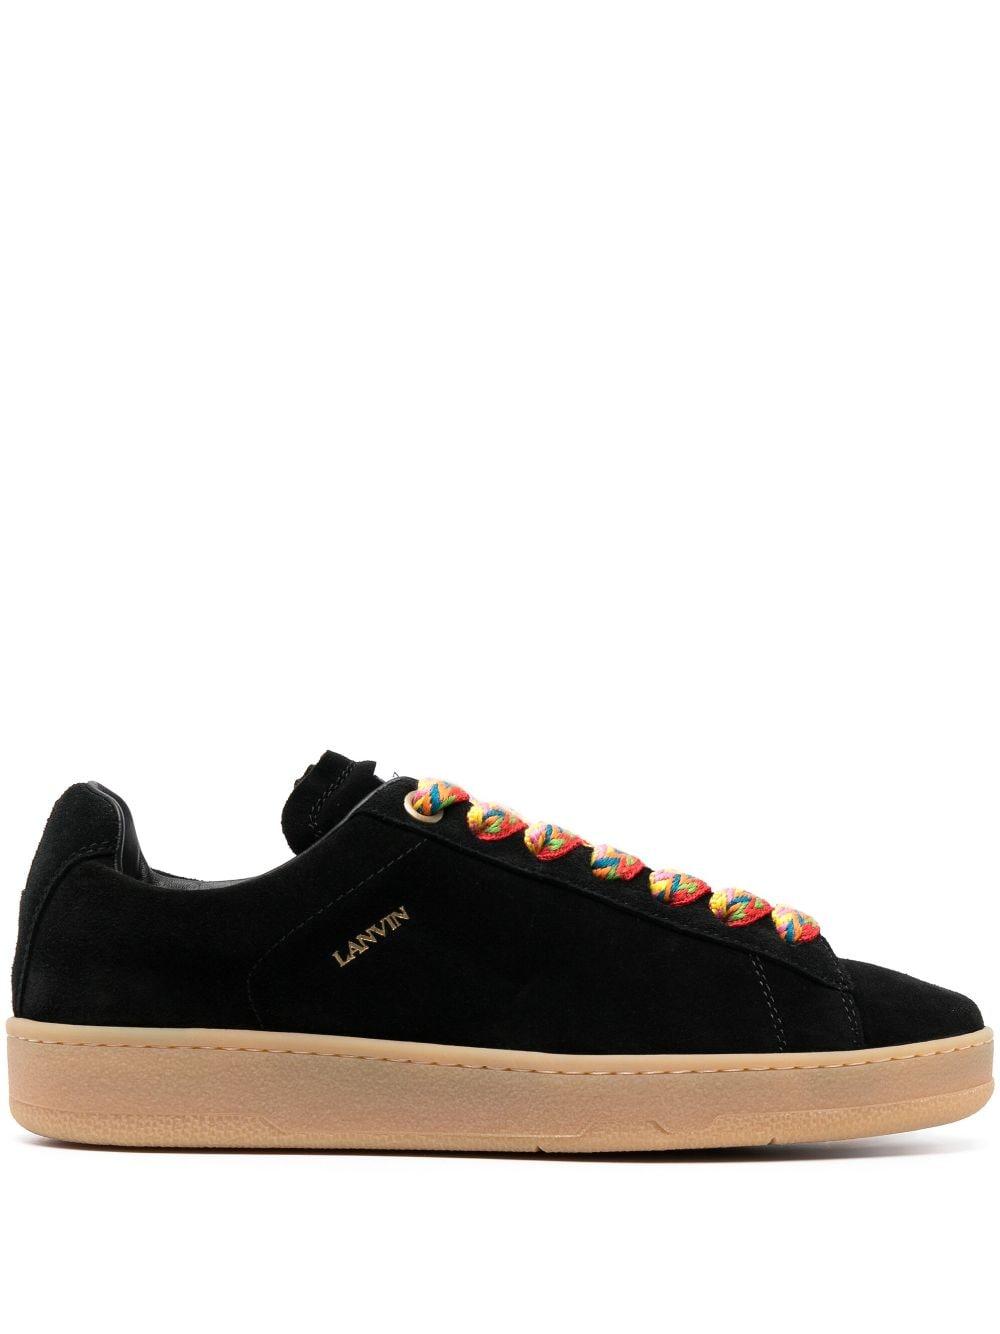 Lanvin Lite Curb Low Top Trainers in Black for Men